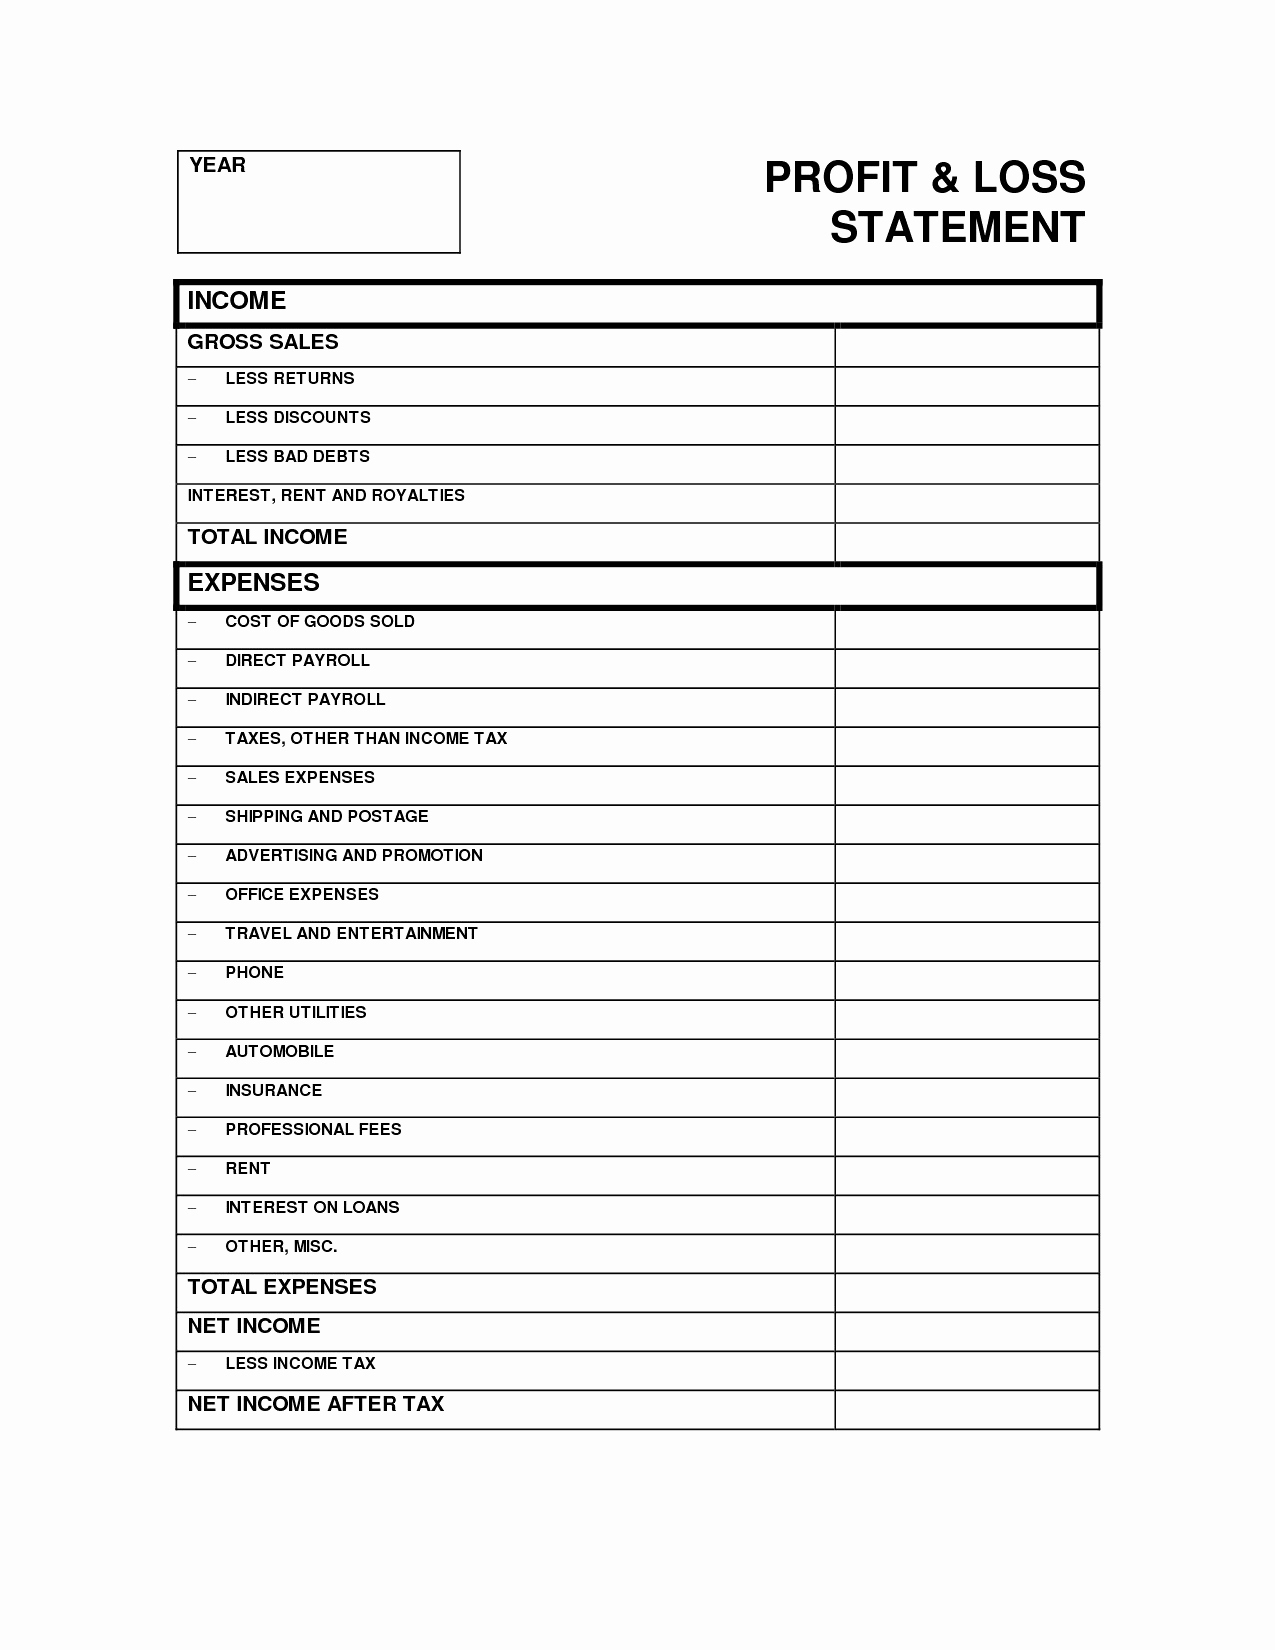 Self Employed Expenses Spreadsheet New Profit And Loss Statement with Self Employed Excel Spreadsheet Template